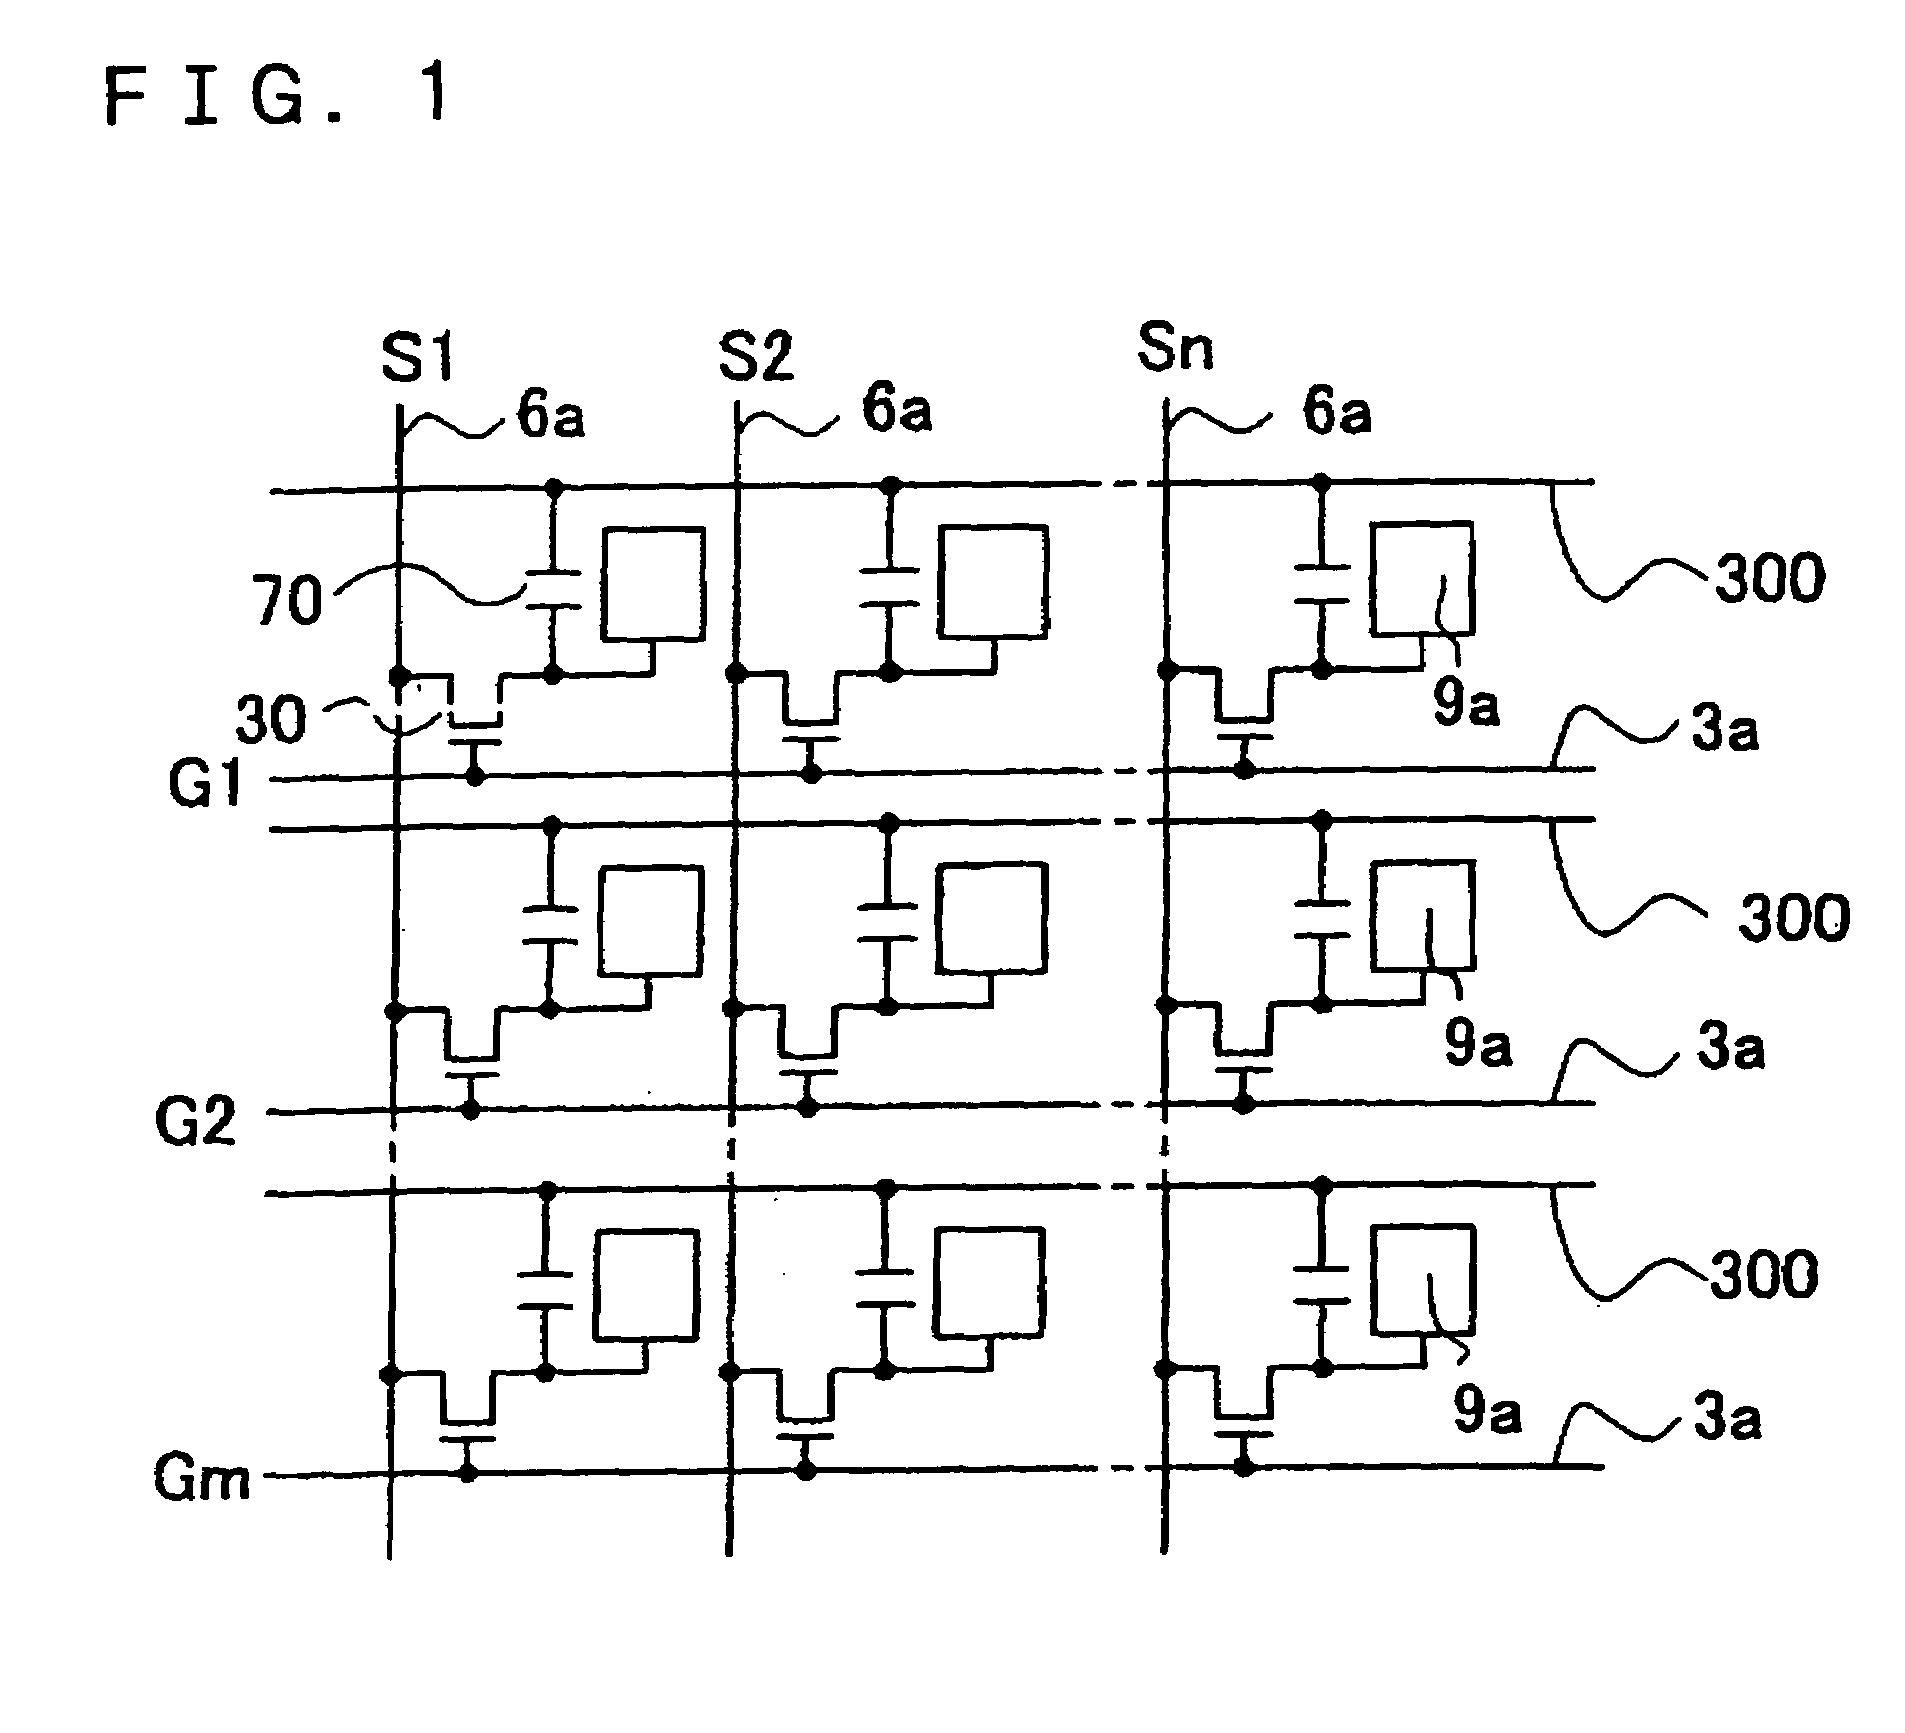 LCD with relay layer connecting pixel electrode with storage capacitor that also covers the storage capacitor